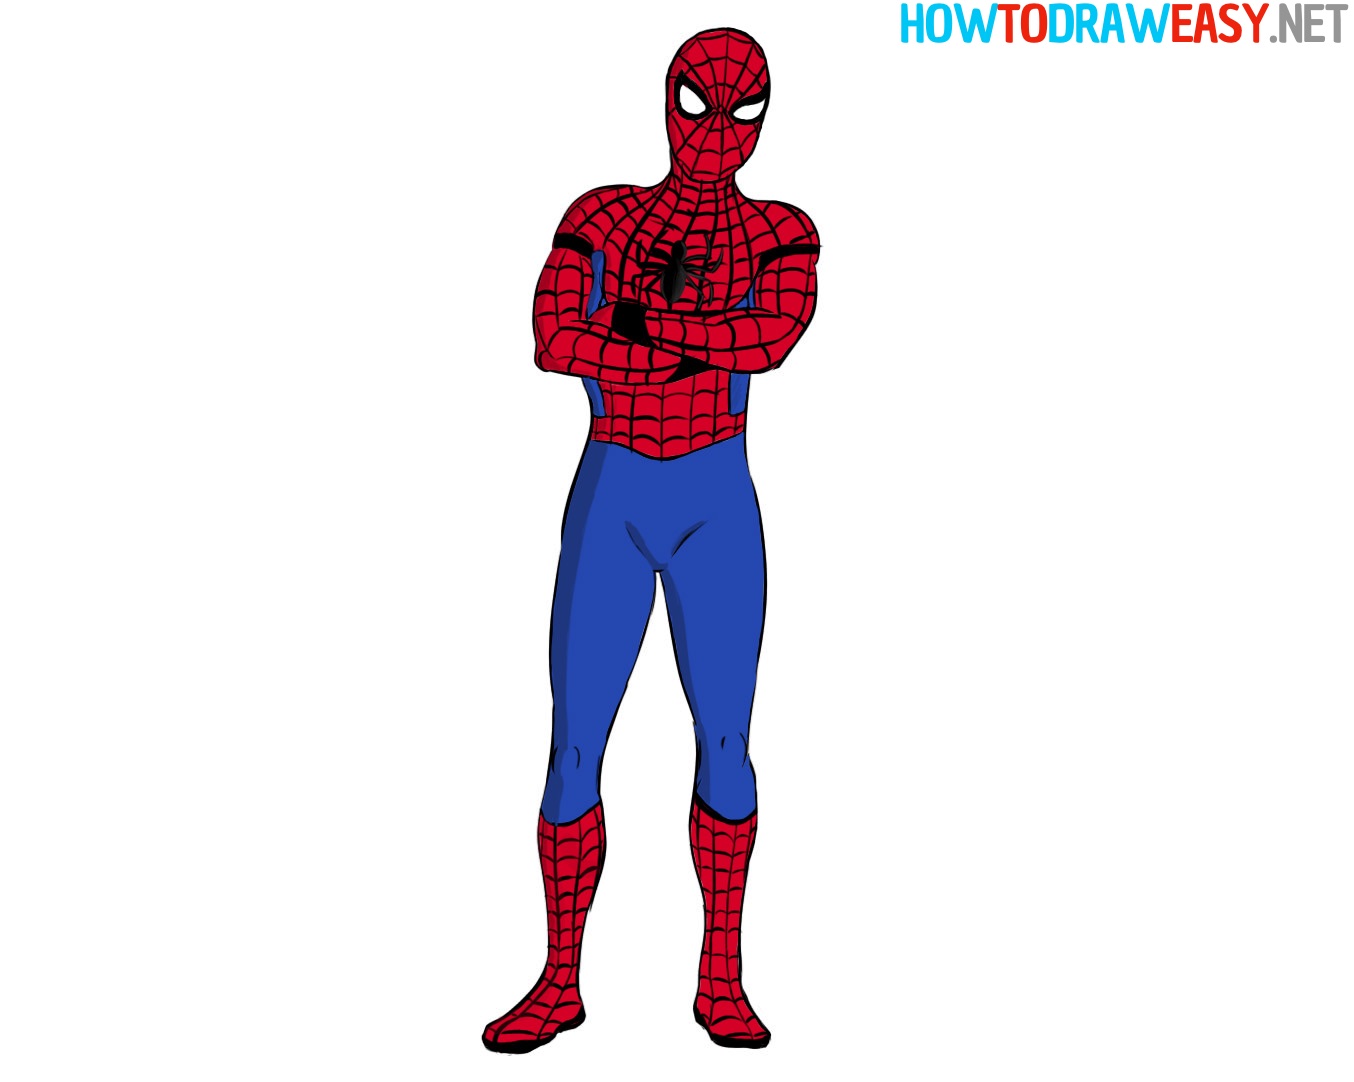 How to Draw a Spider Man Easy